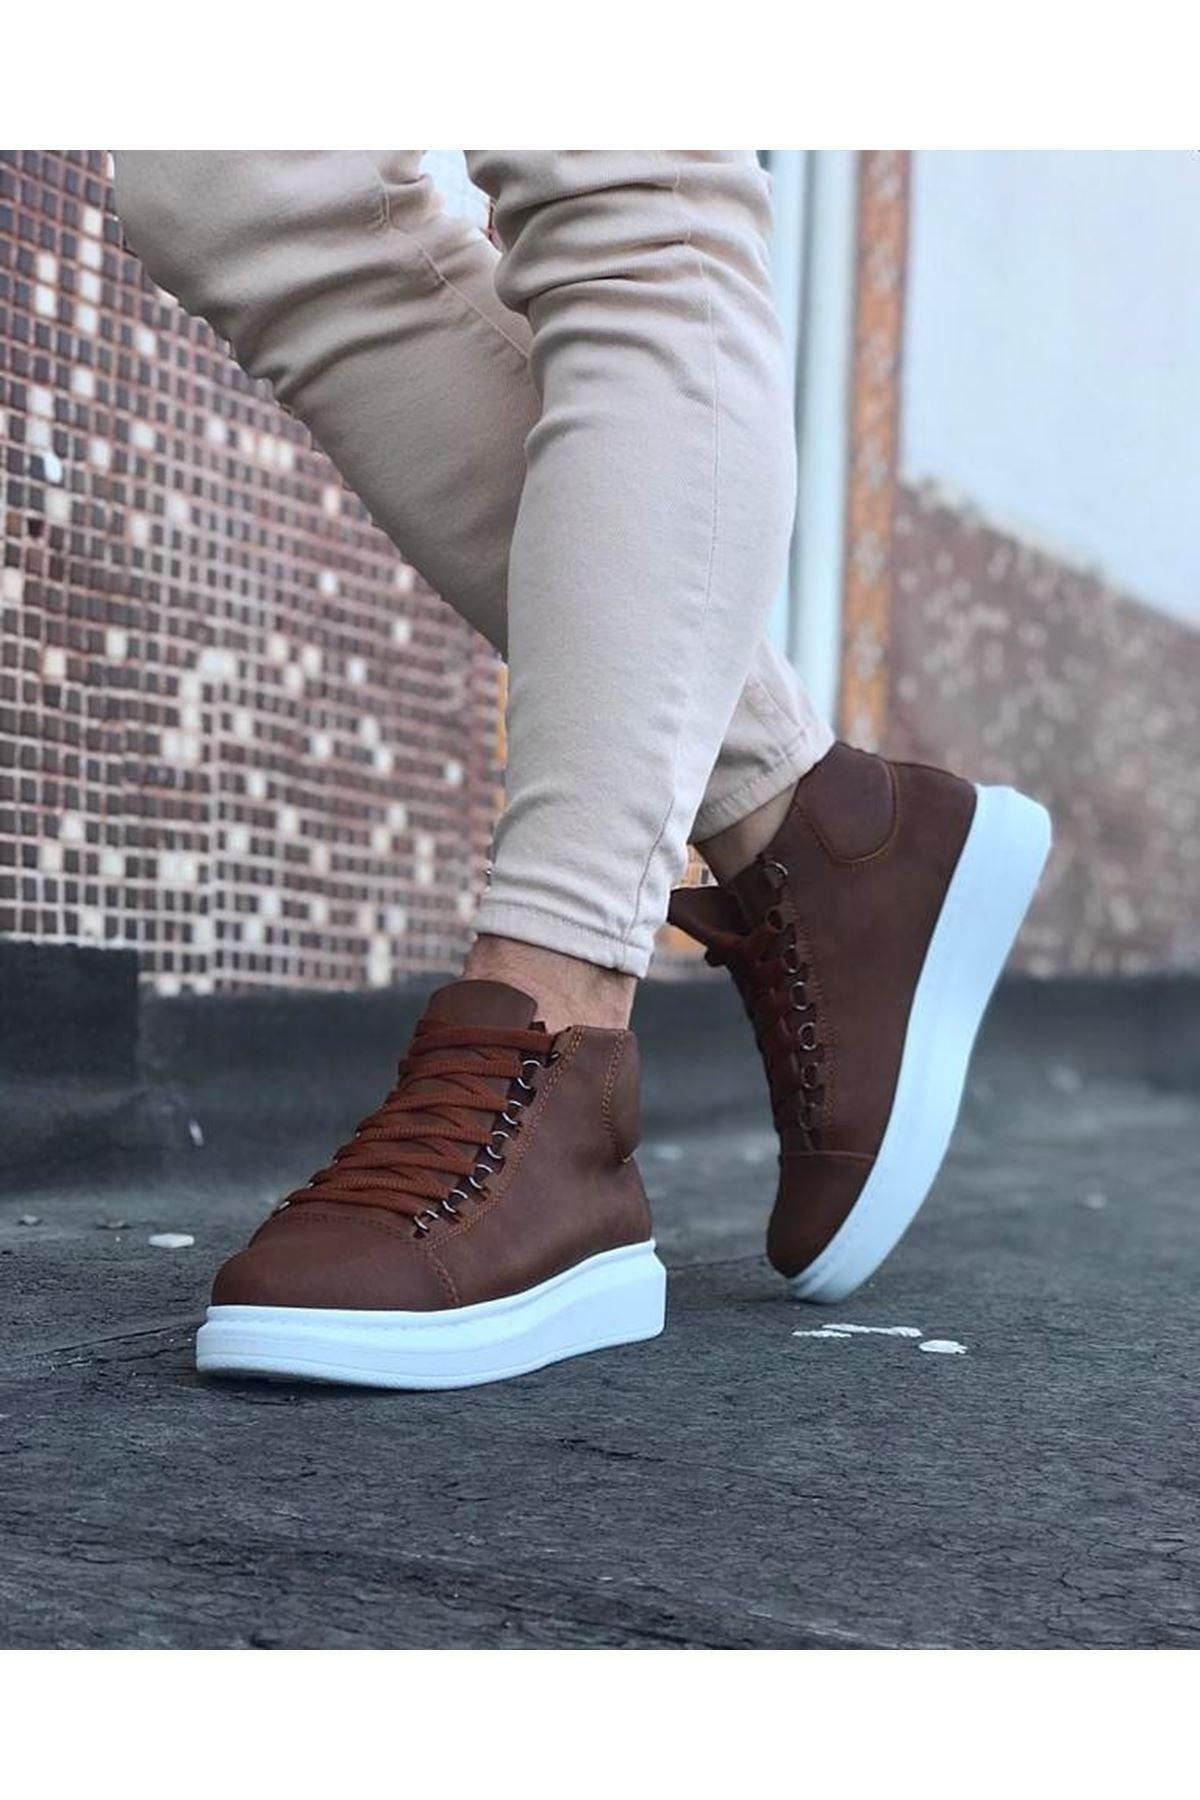 WG032 Tan Lace-up Sneakers Half Ankle Boots - STREET MODE ™